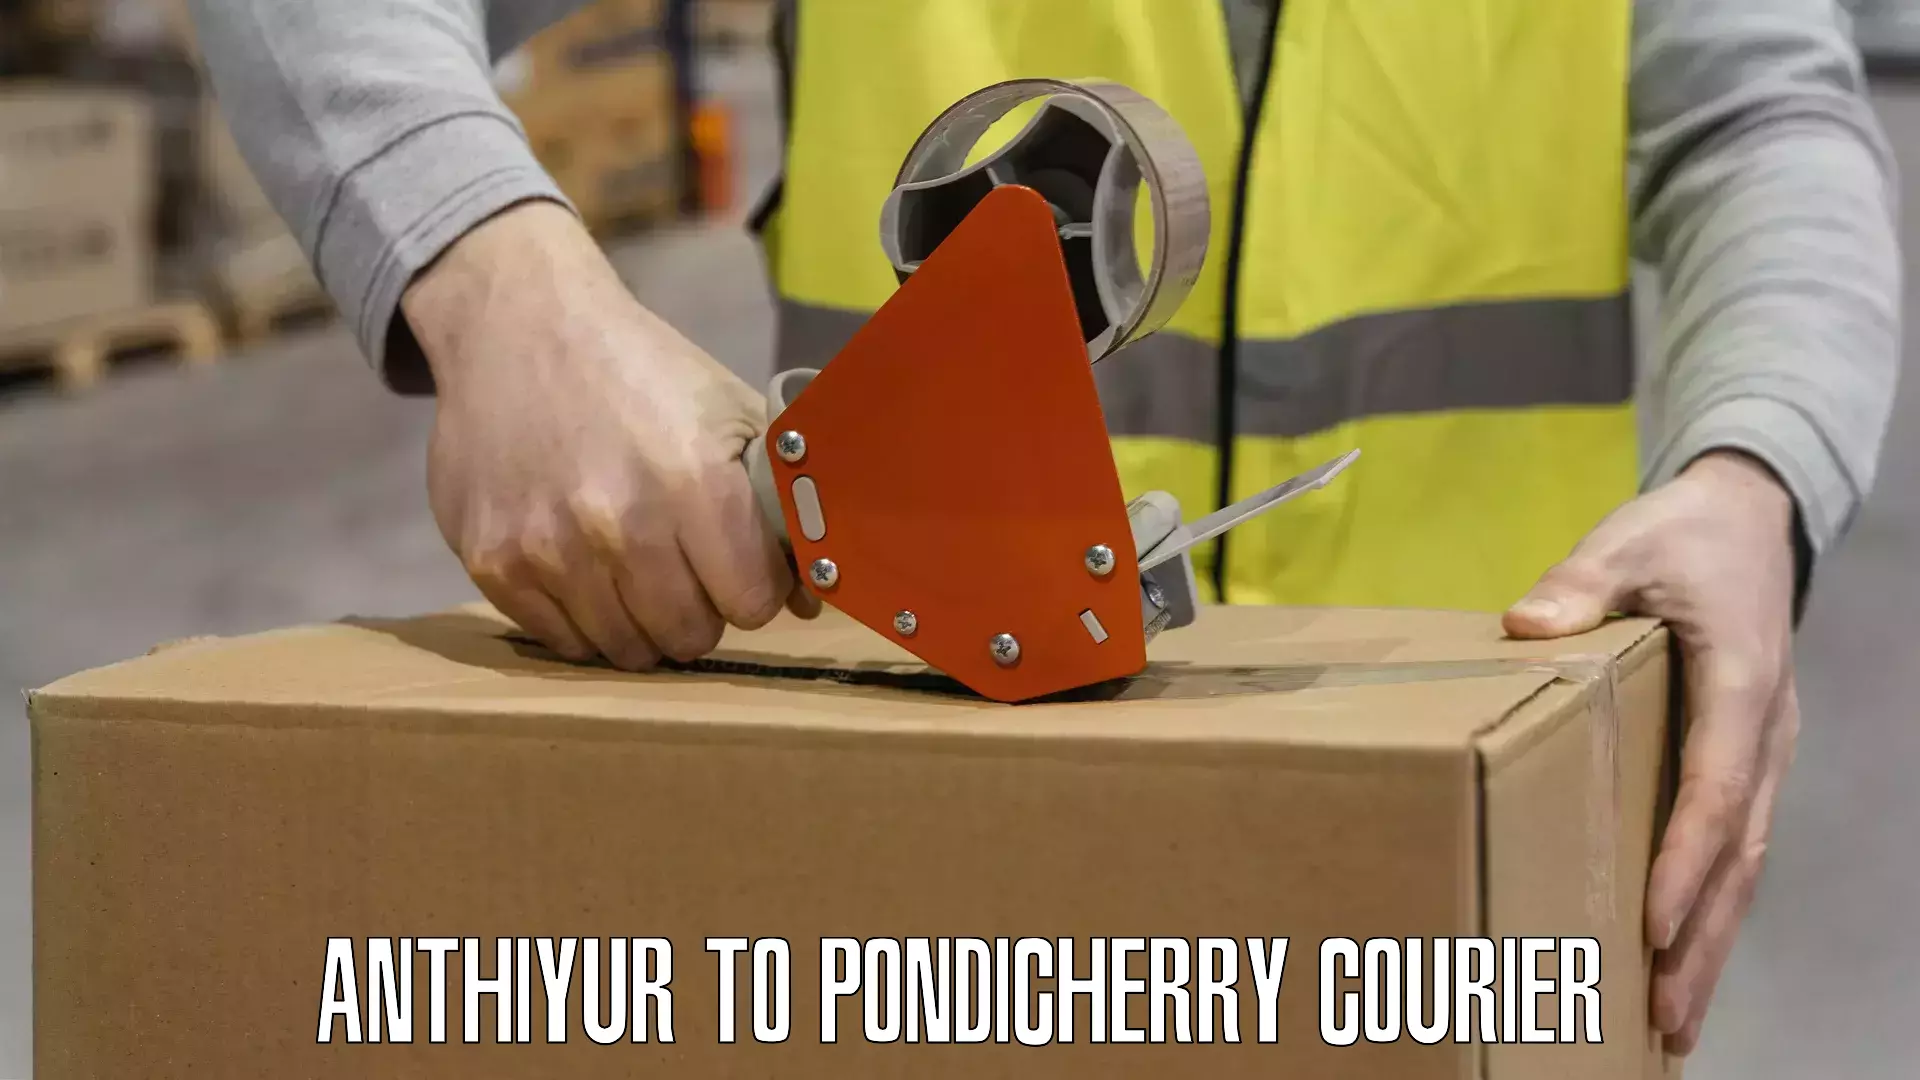 Automated shipping processes Anthiyur to Pondicherry